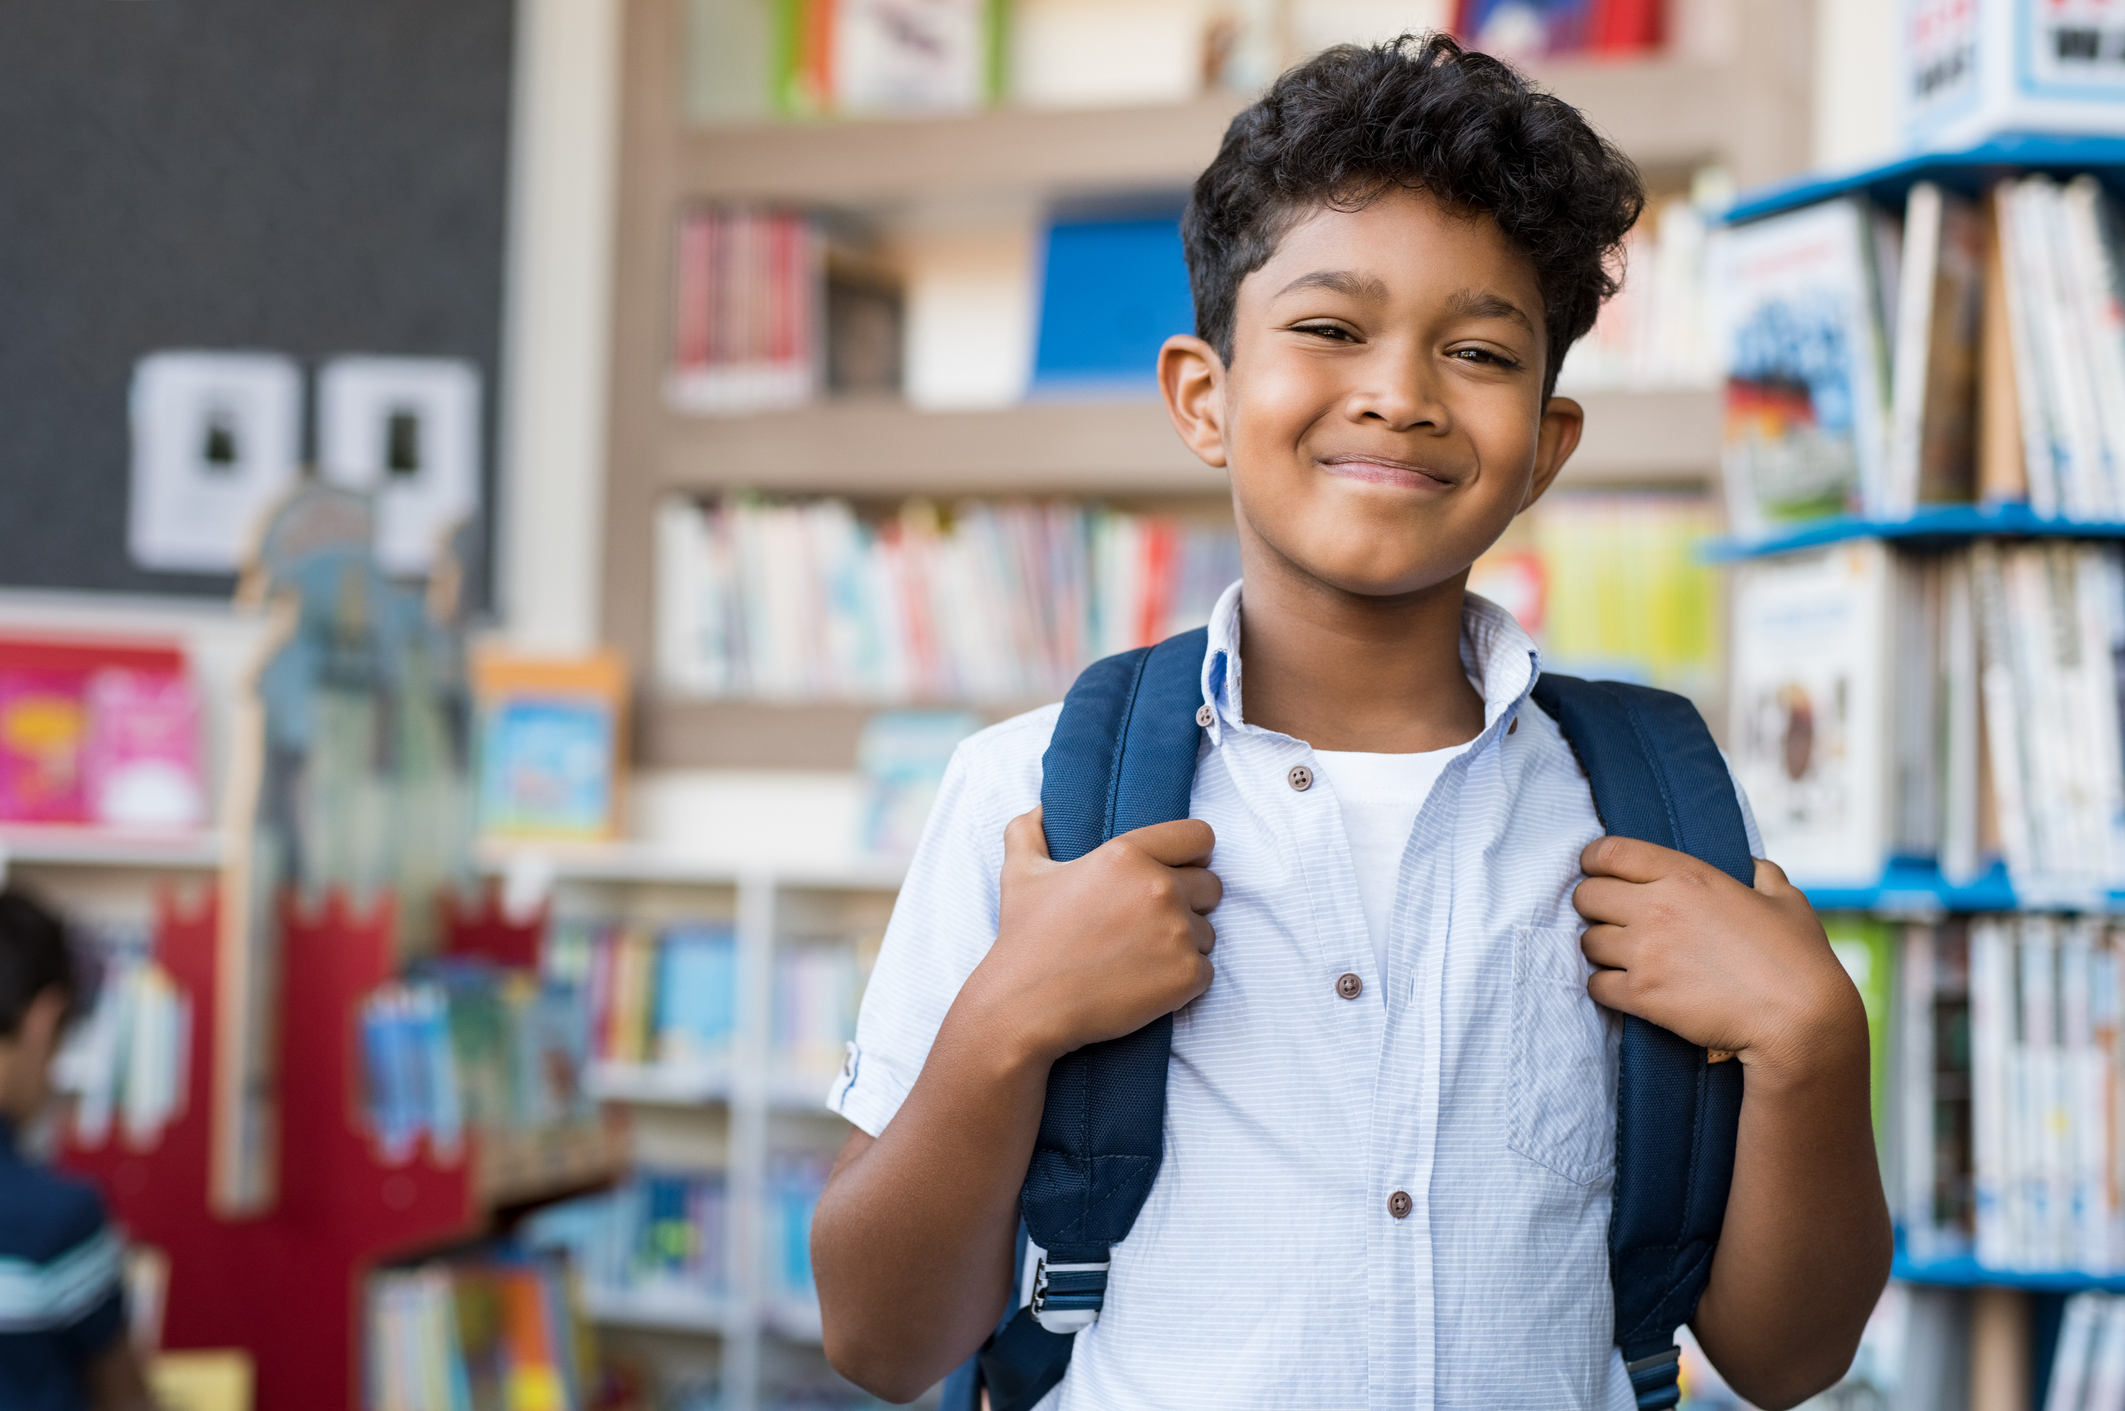 Portrait of smiling Latino boy looking at camera, carrying backpack and standing in library at school.